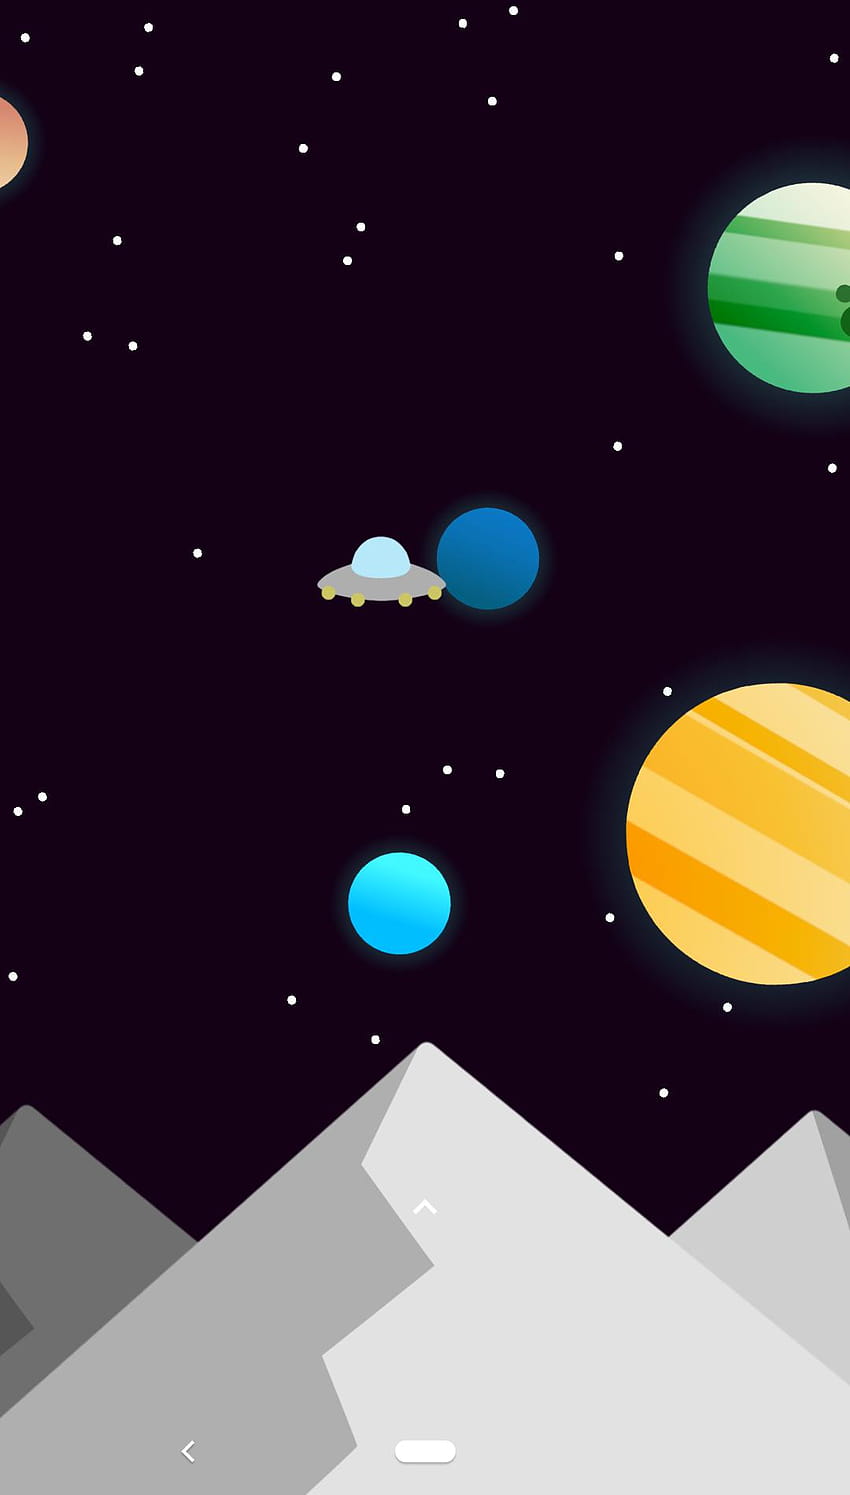 Starry Night Live Wallpaper: Peaceful Planets and a Nebula - free download